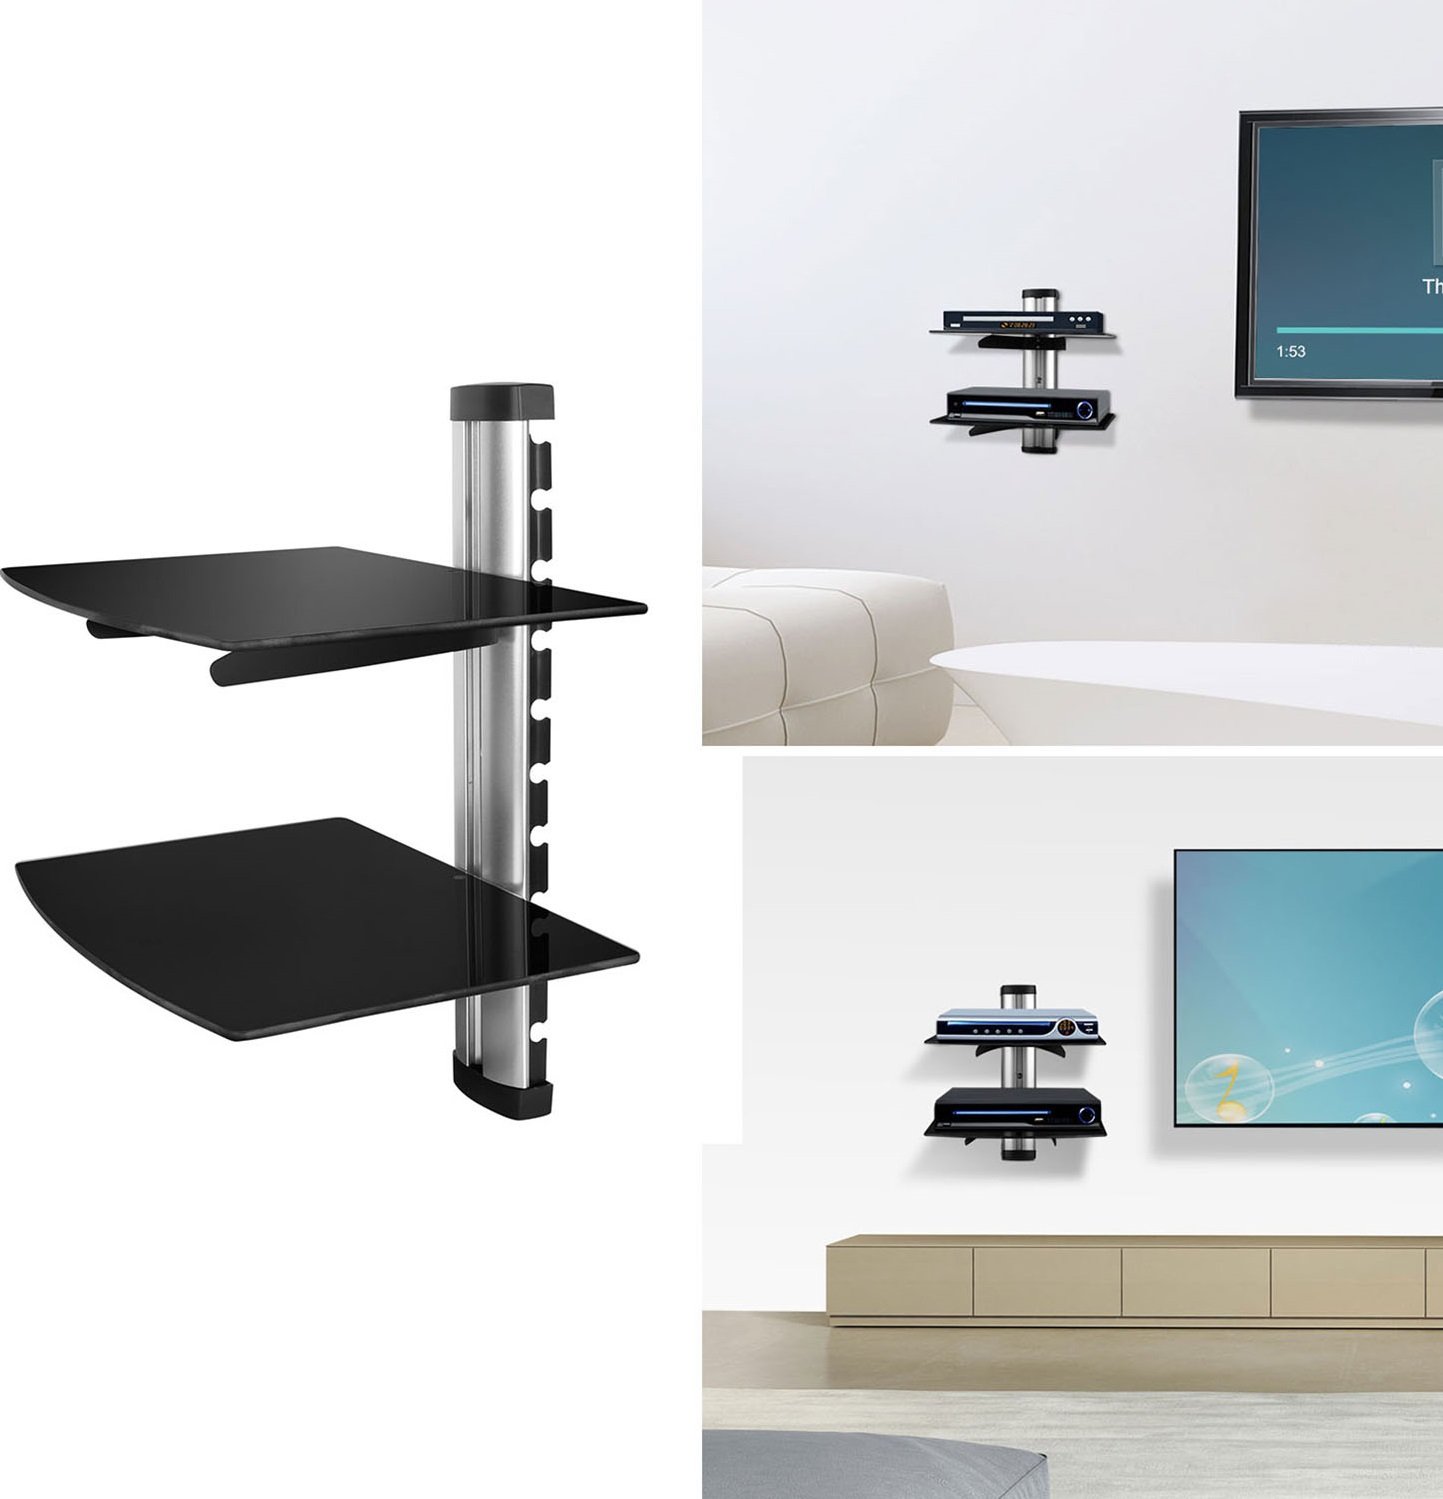 gpct floating wall mount strengthened tempered shelf system bracket double glass component stand dvd player receiver gaming systems xbox one vanity shelves tall oak large iron